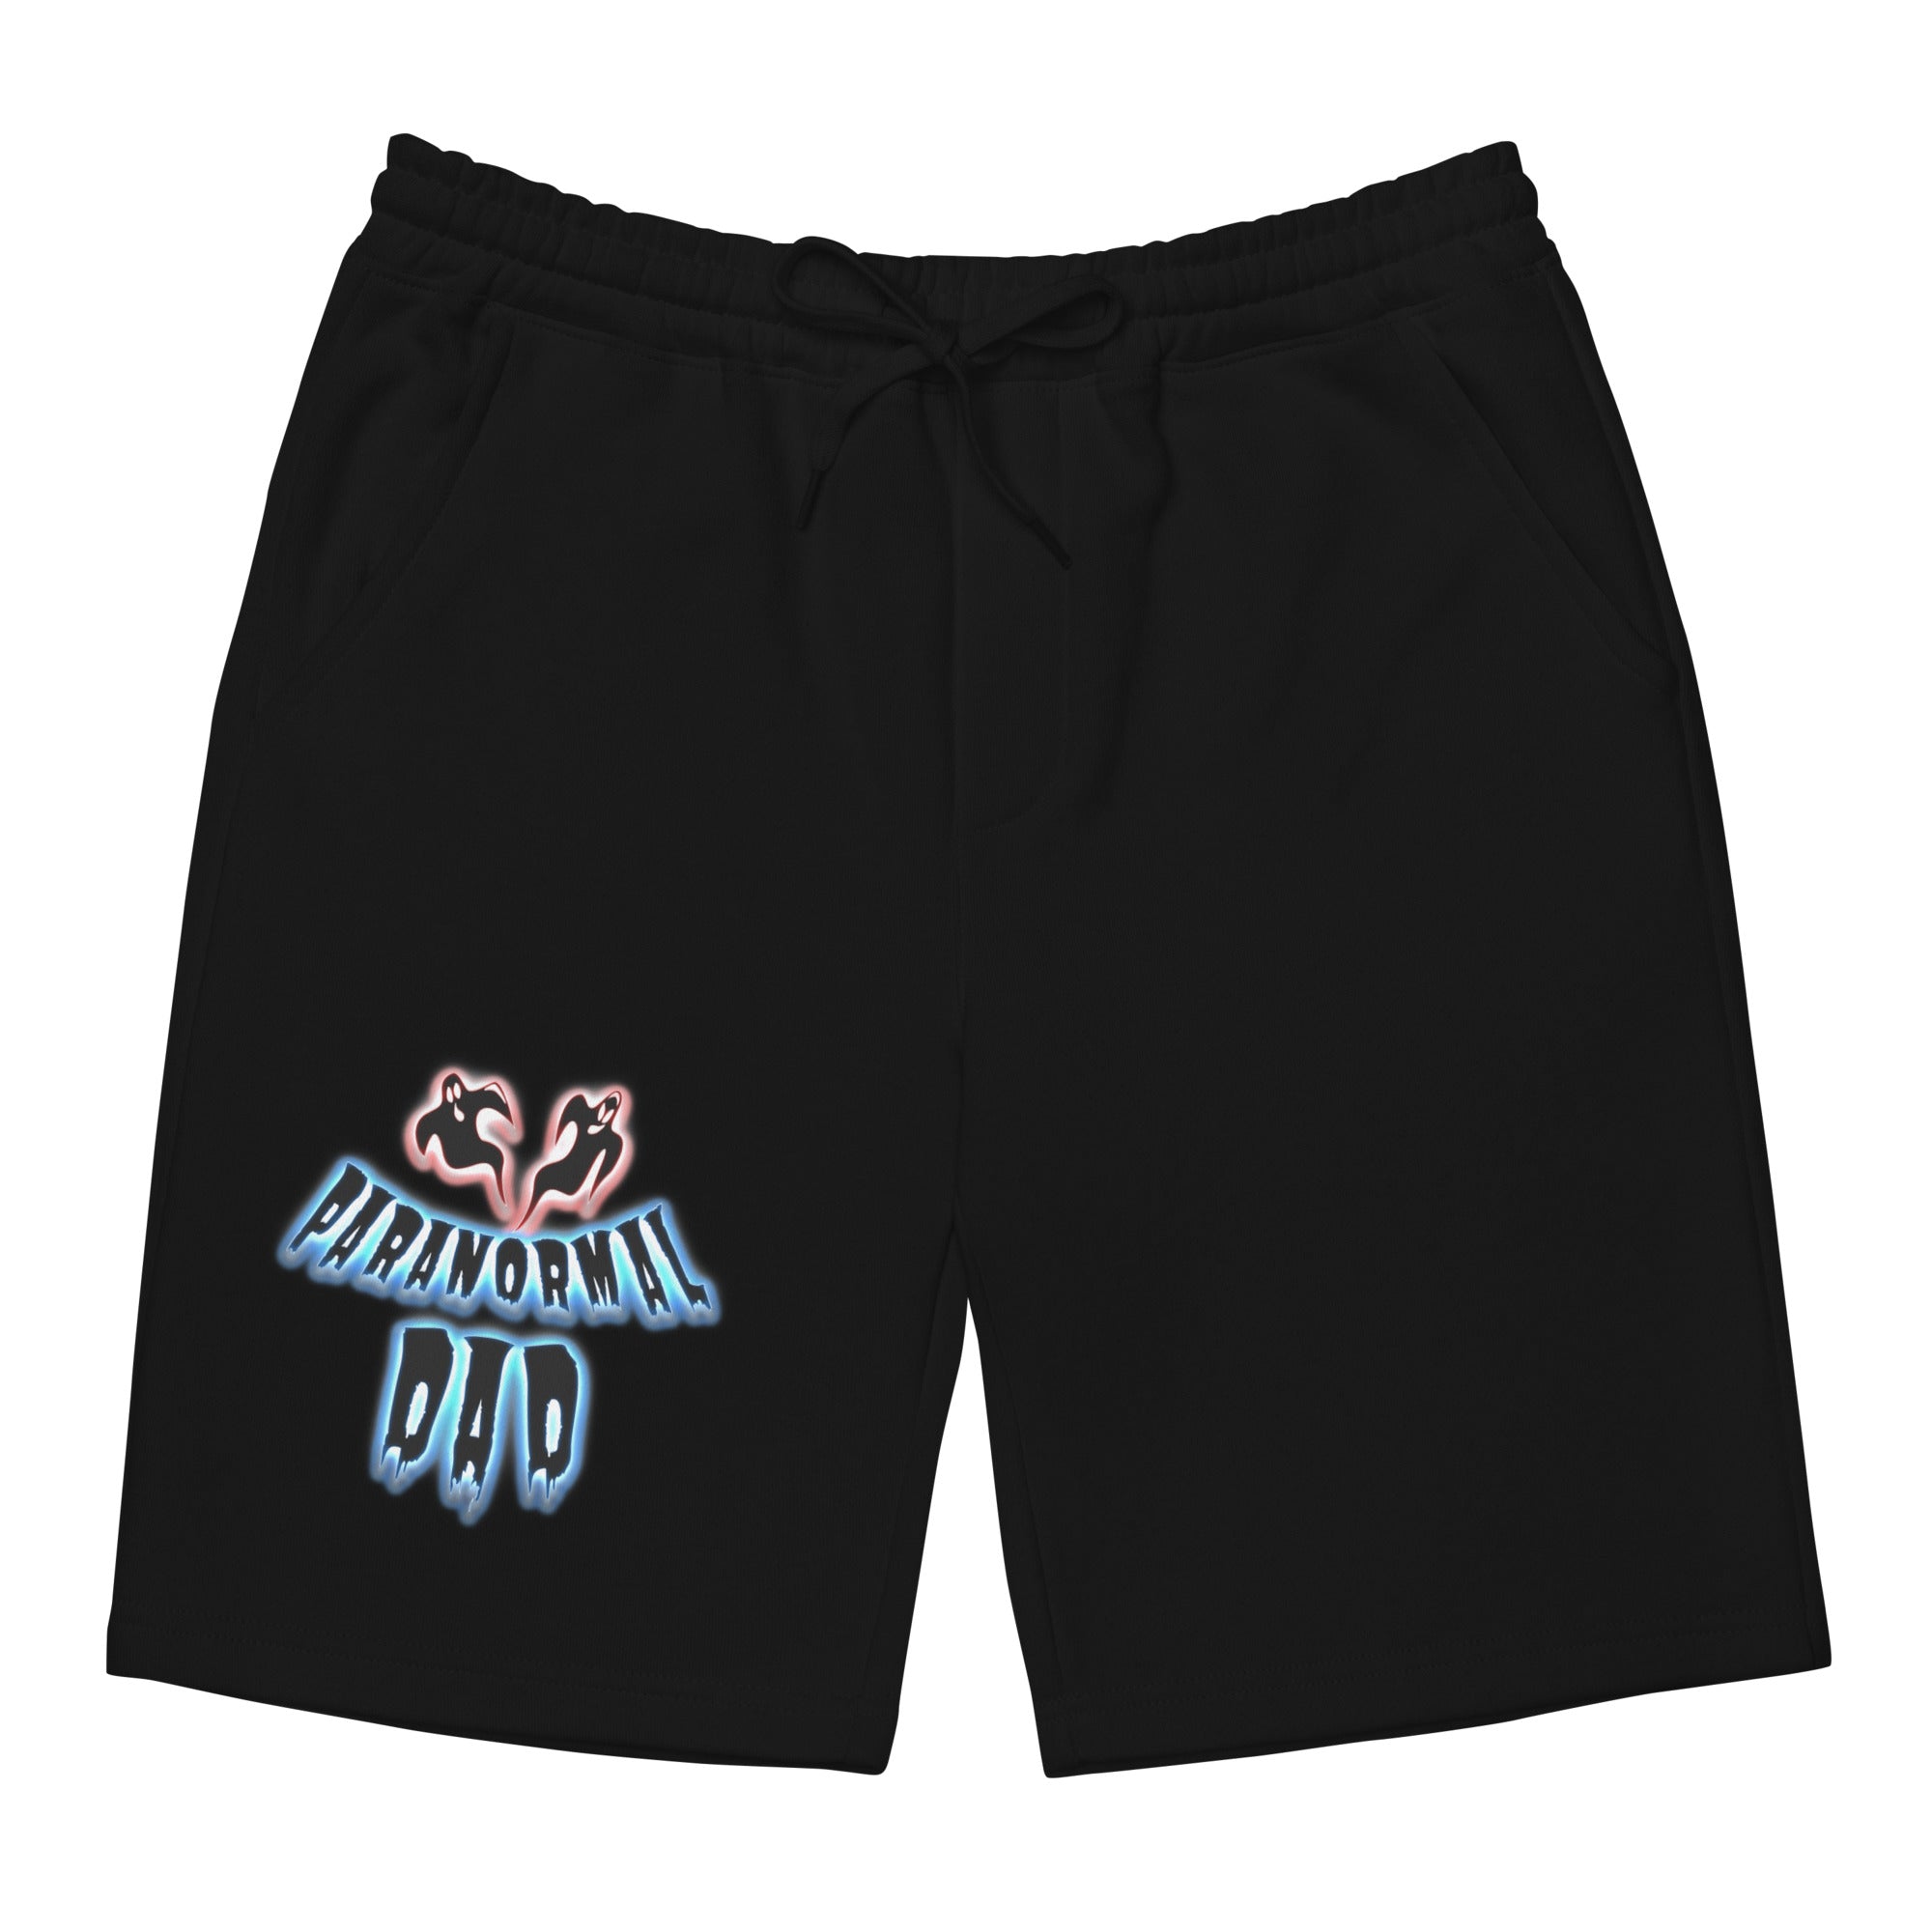 Paranormal Ghost Dad Poltergeist Father's Day Gift Men's fleece shorts